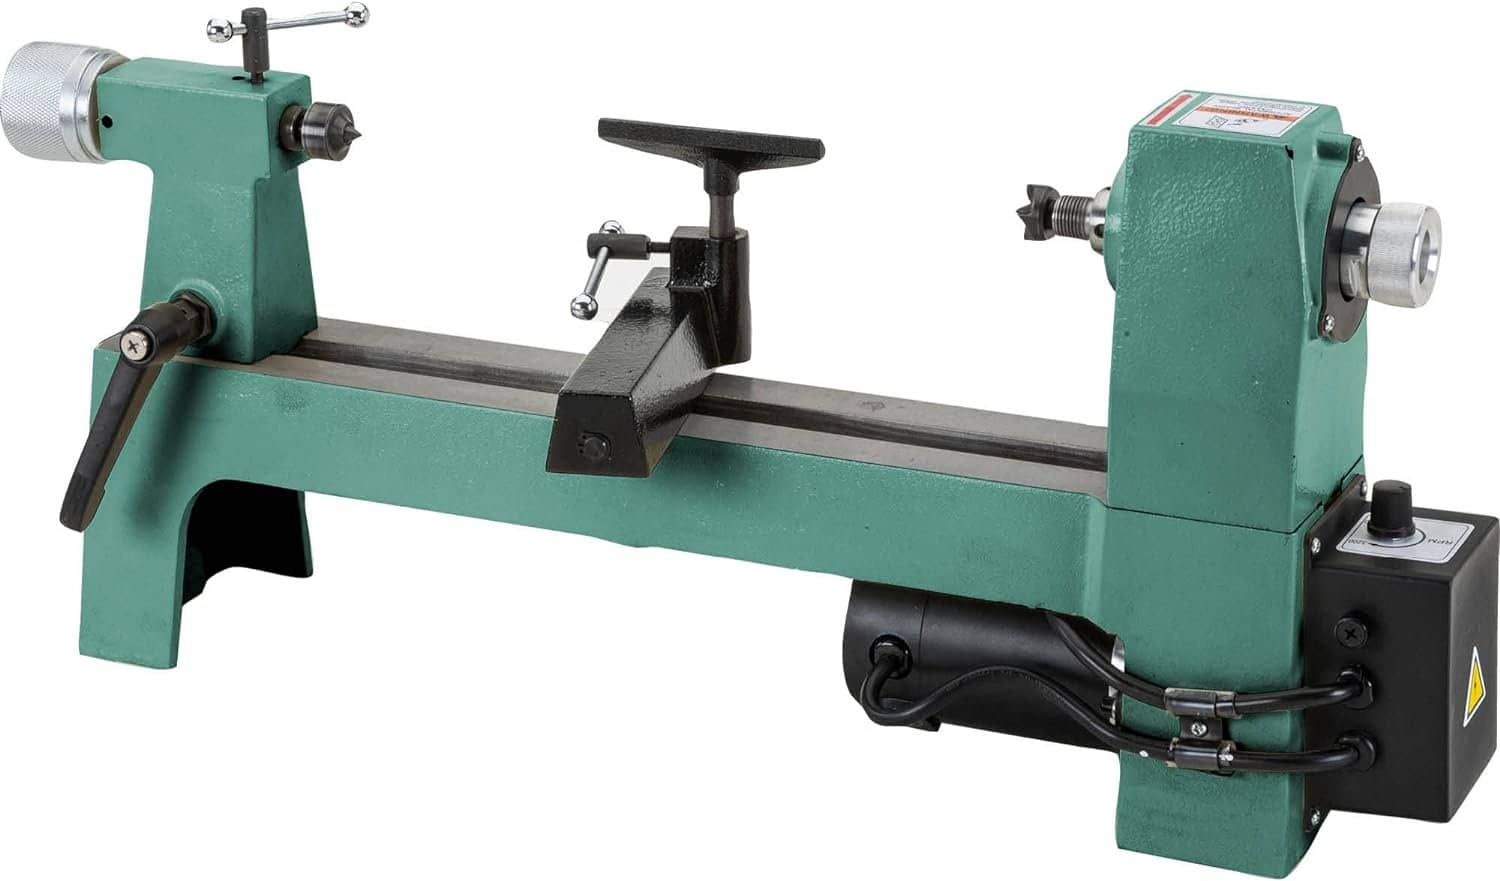 Grizzly Industrial T32536 8 x 13 Benchtop Wood Lathe